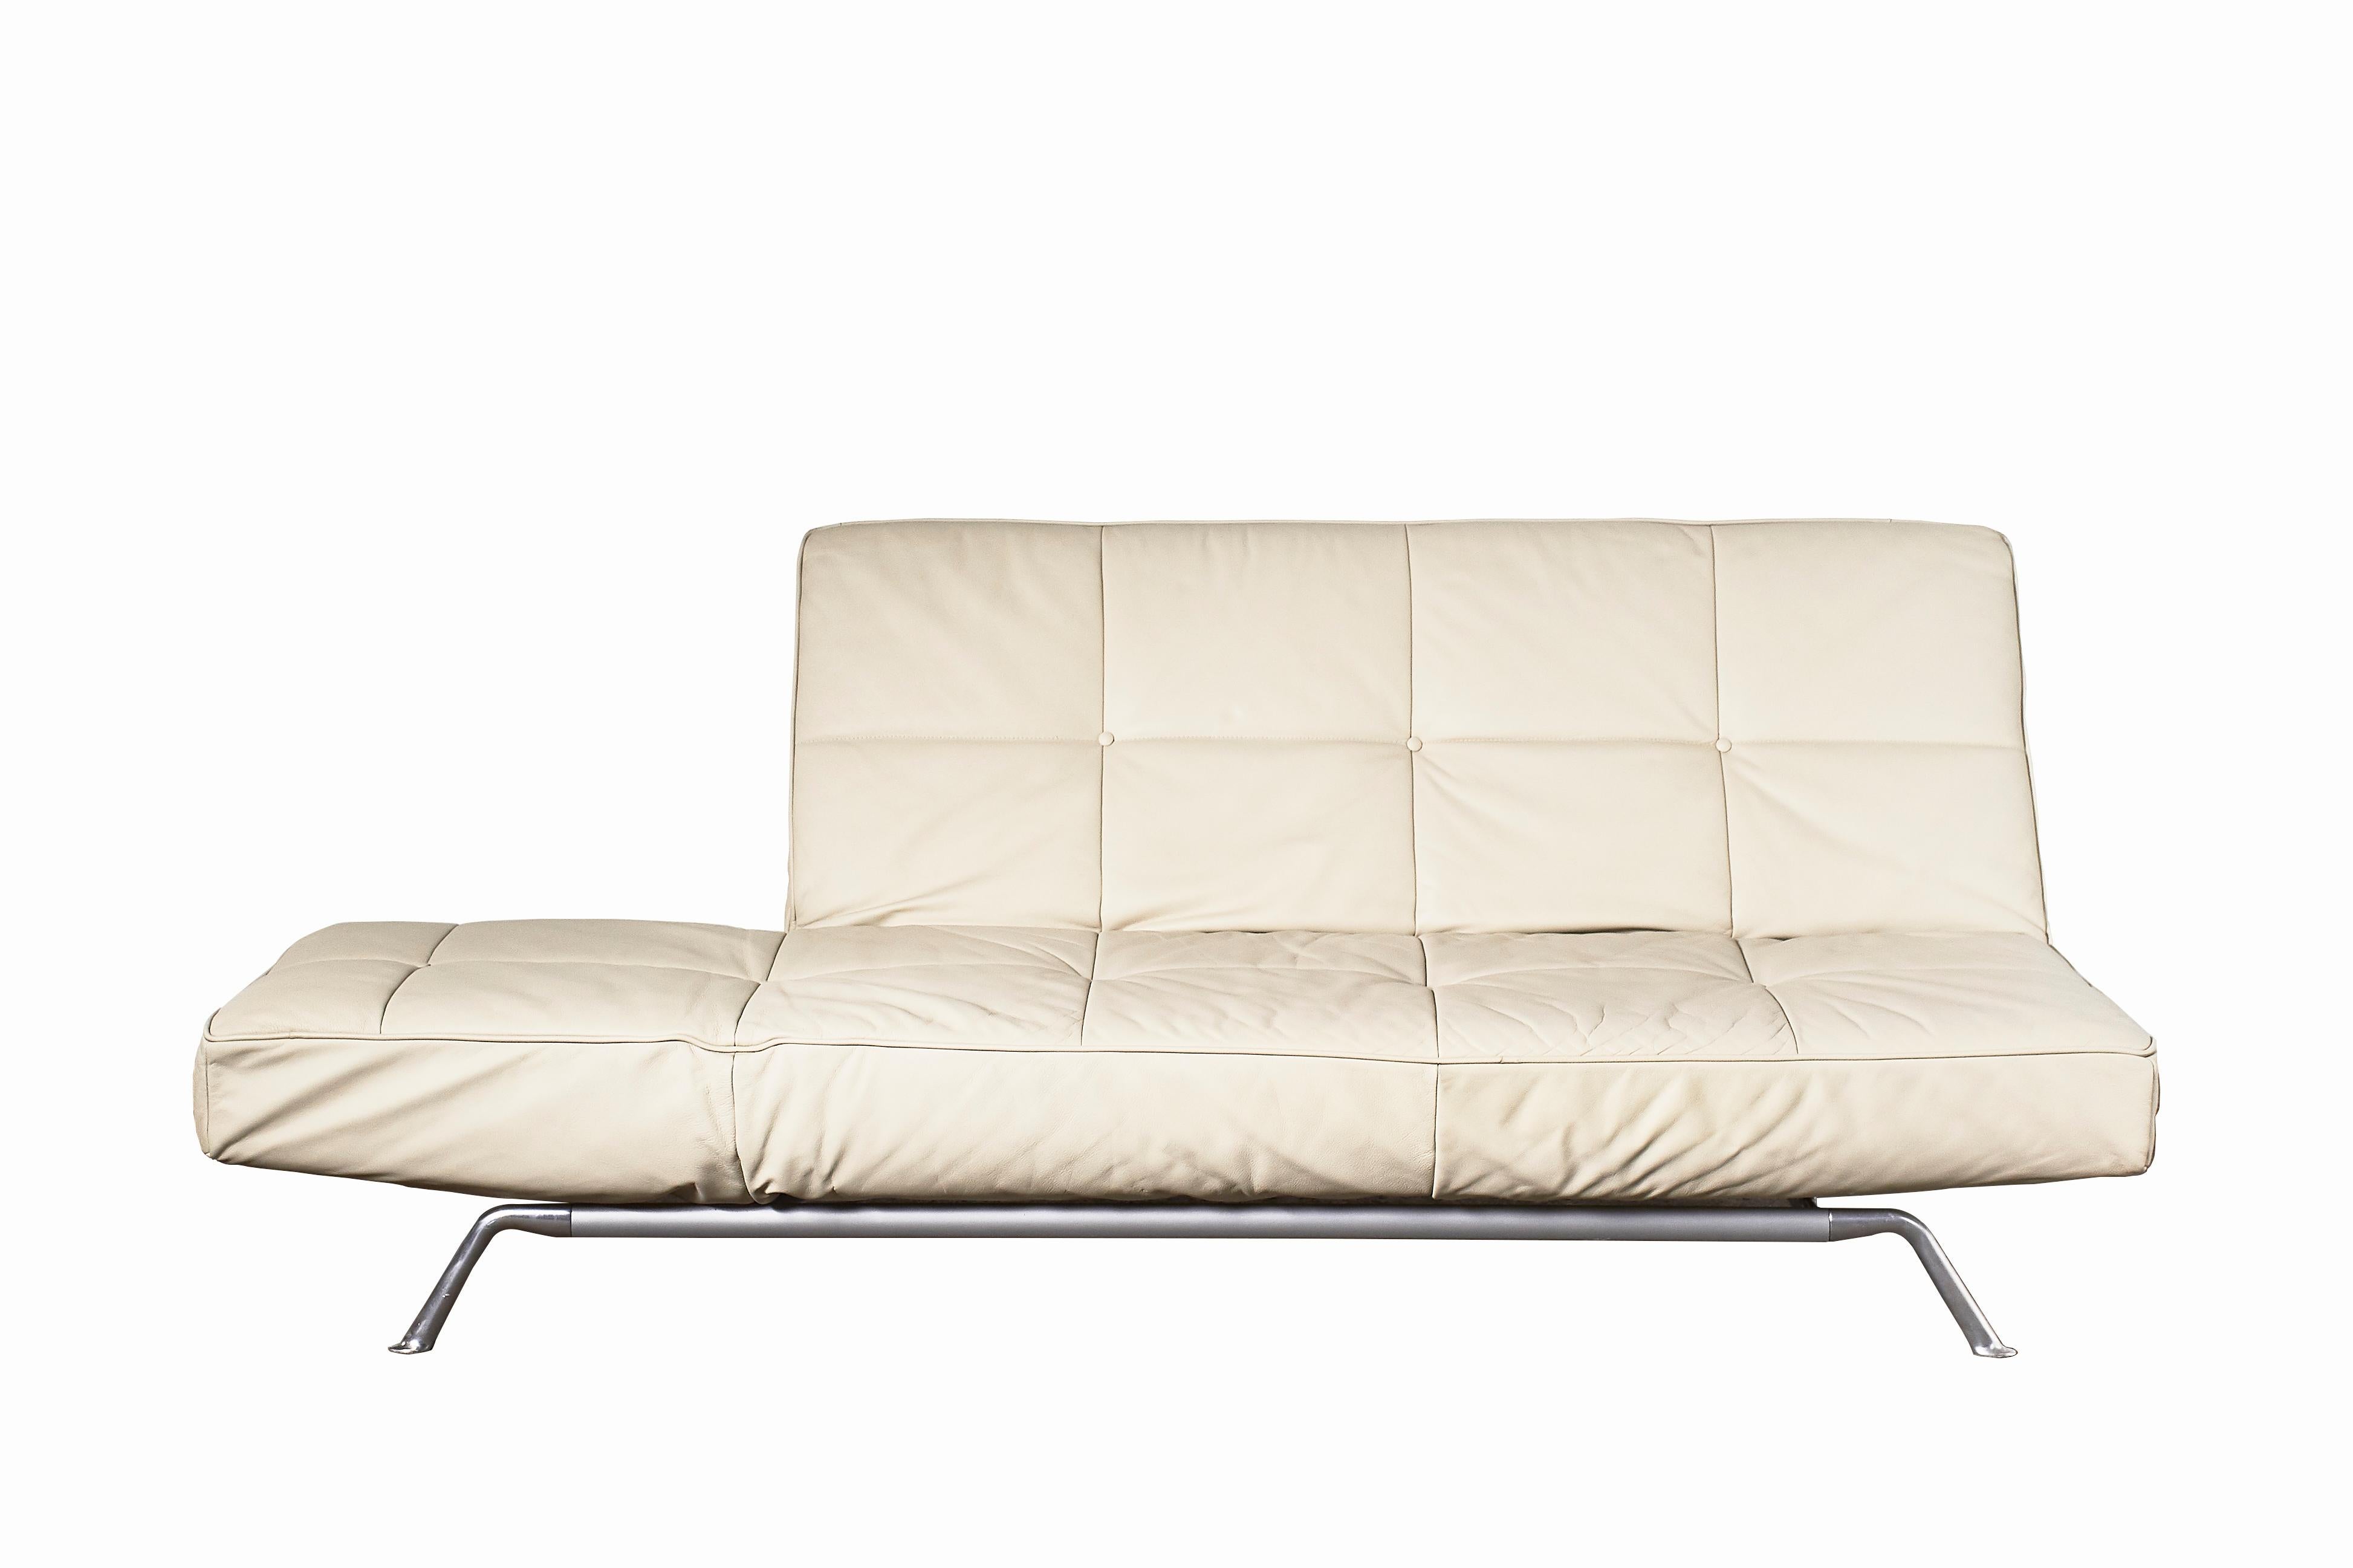 Ships from Kentucky, USA.

Made in France by Ligne Roset, this iconic adjustable daybed / sofa in luxurious beige leather is as chic as it is versatile. Clean lines, generous proportions and finest materials portray a timeless Mid Century Modern